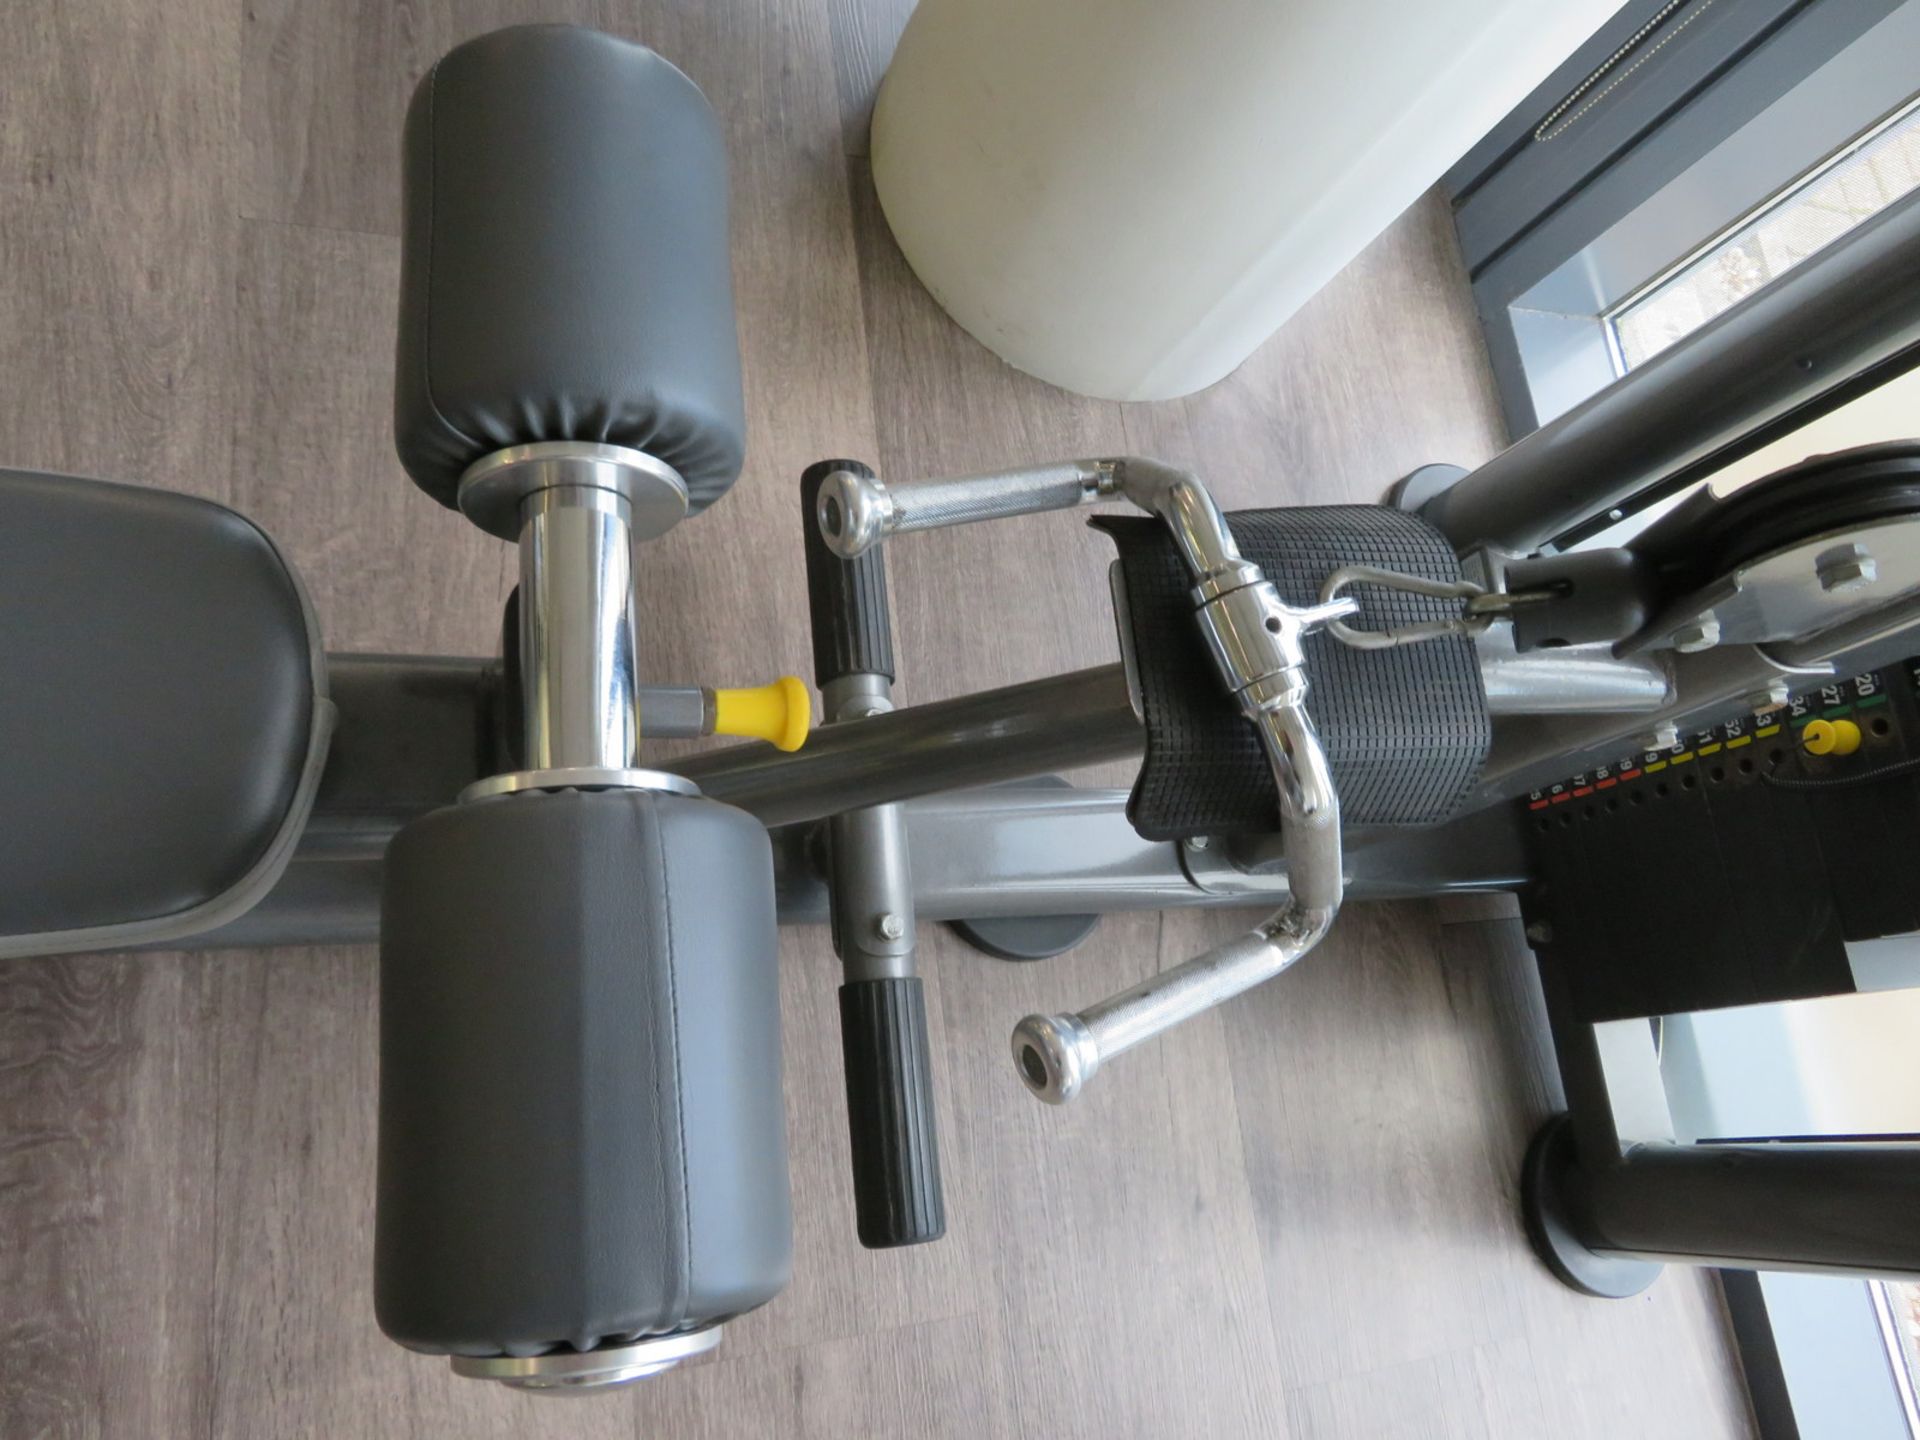 GymGear Elite Series Latt Pulldown/Vertical Row complete with attachments. 125kg weight stacks. - Image 4 of 7